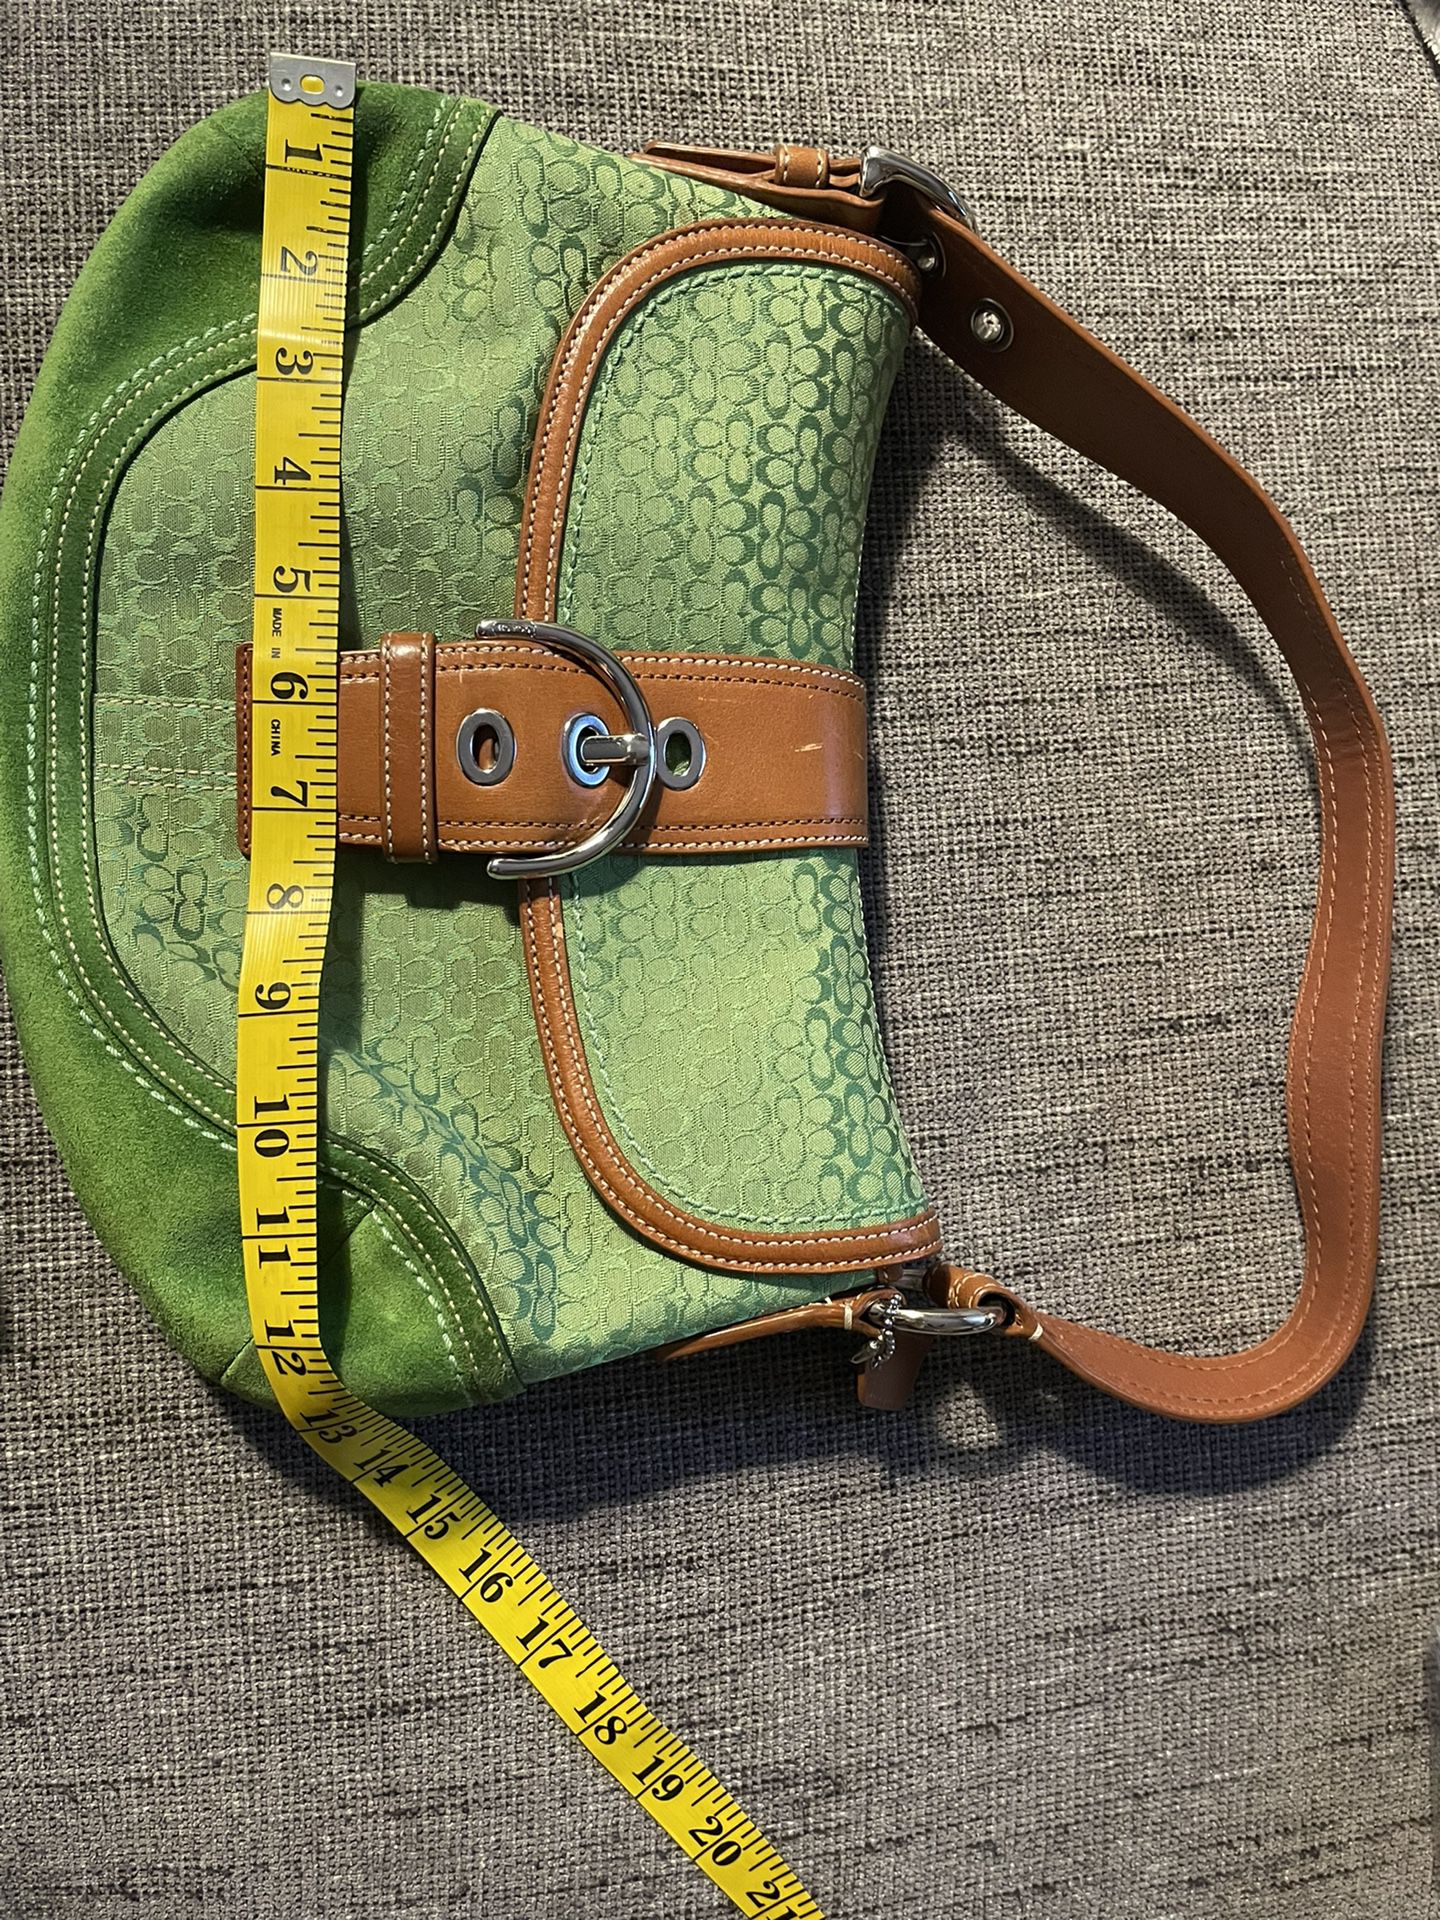 Authentic Coach bag up for grabs! : r/delusionalcraigslist